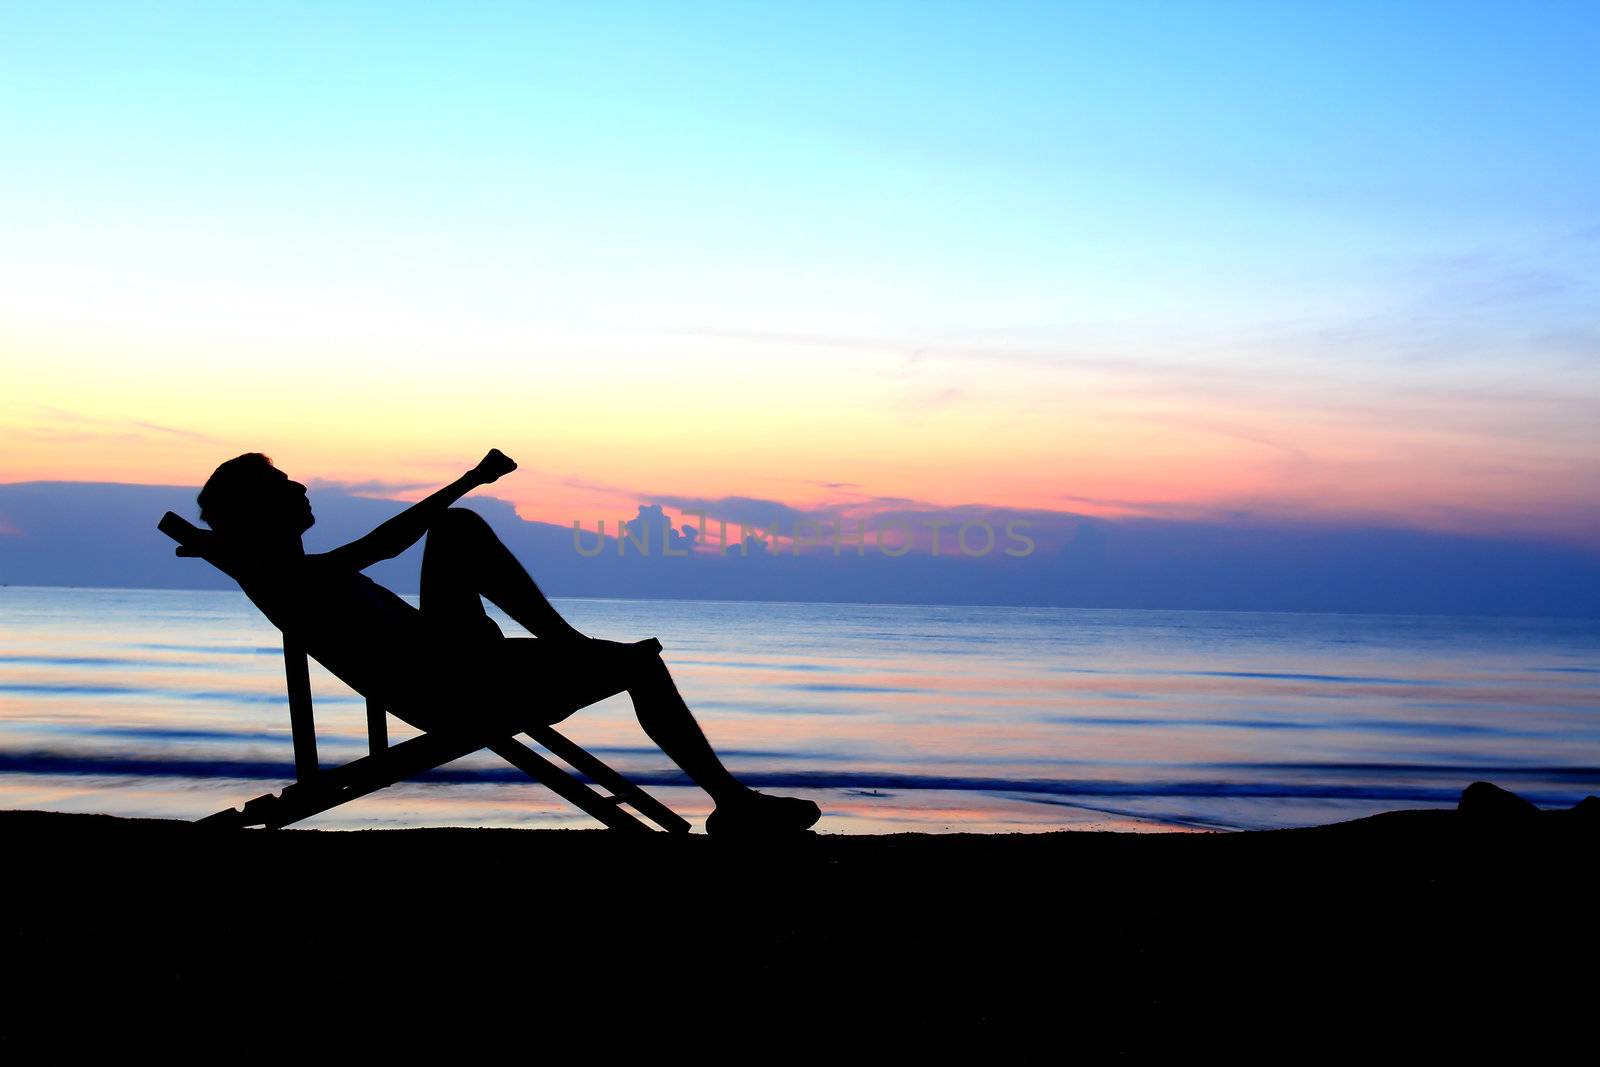   deckchairs and man on beach at sunset 
 by rufous